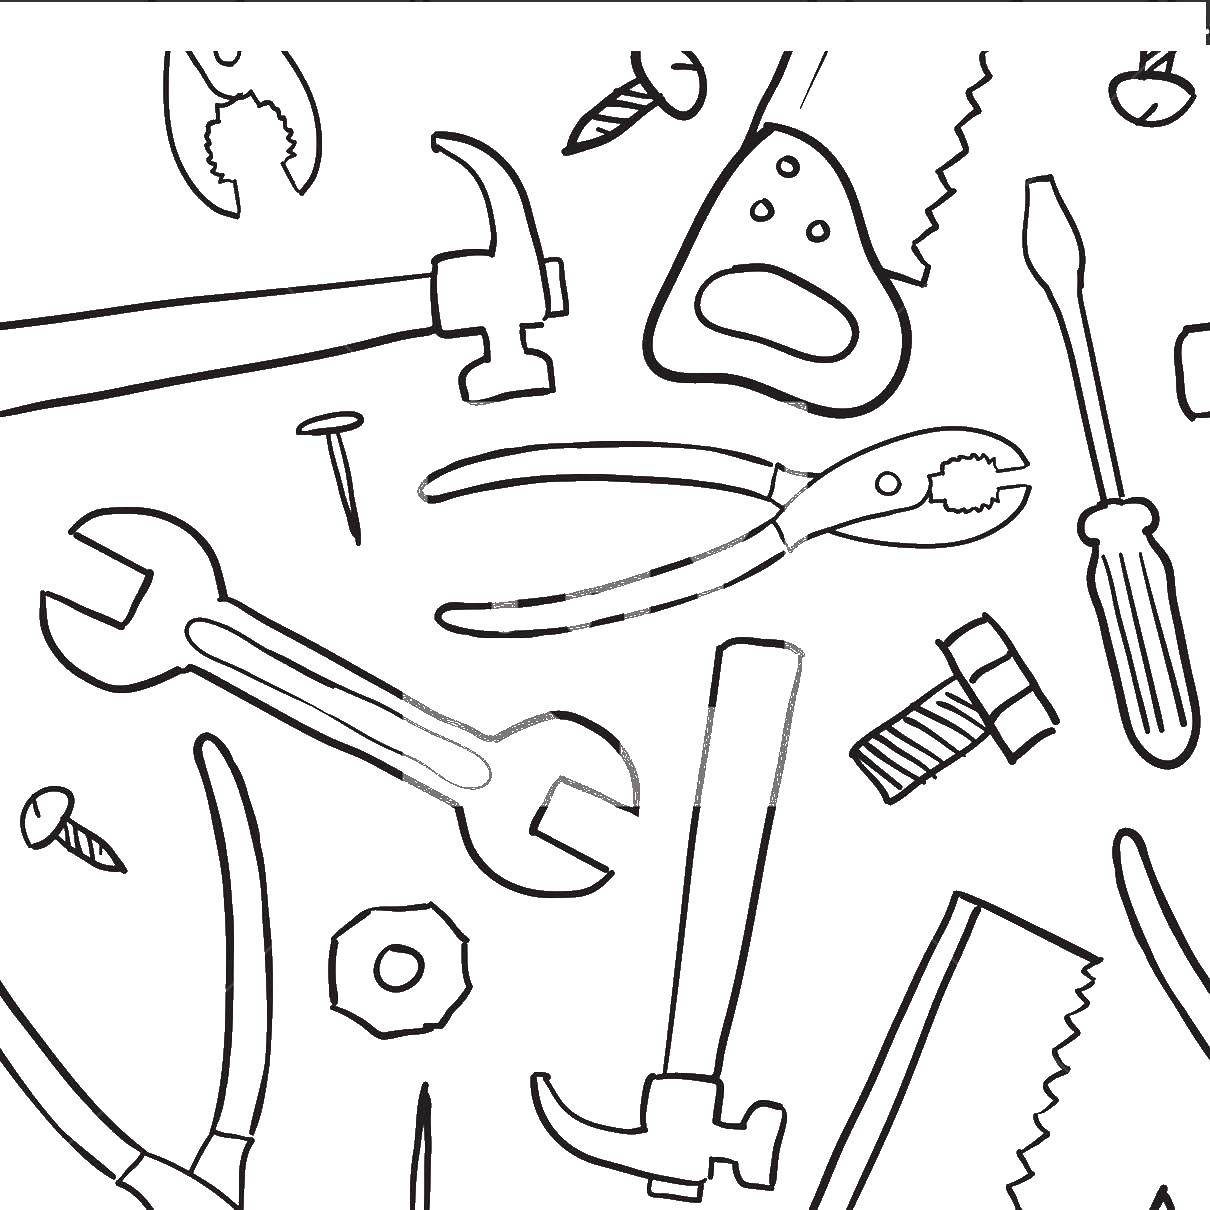 Coloring Tools. Category tools. Tags:  tools.